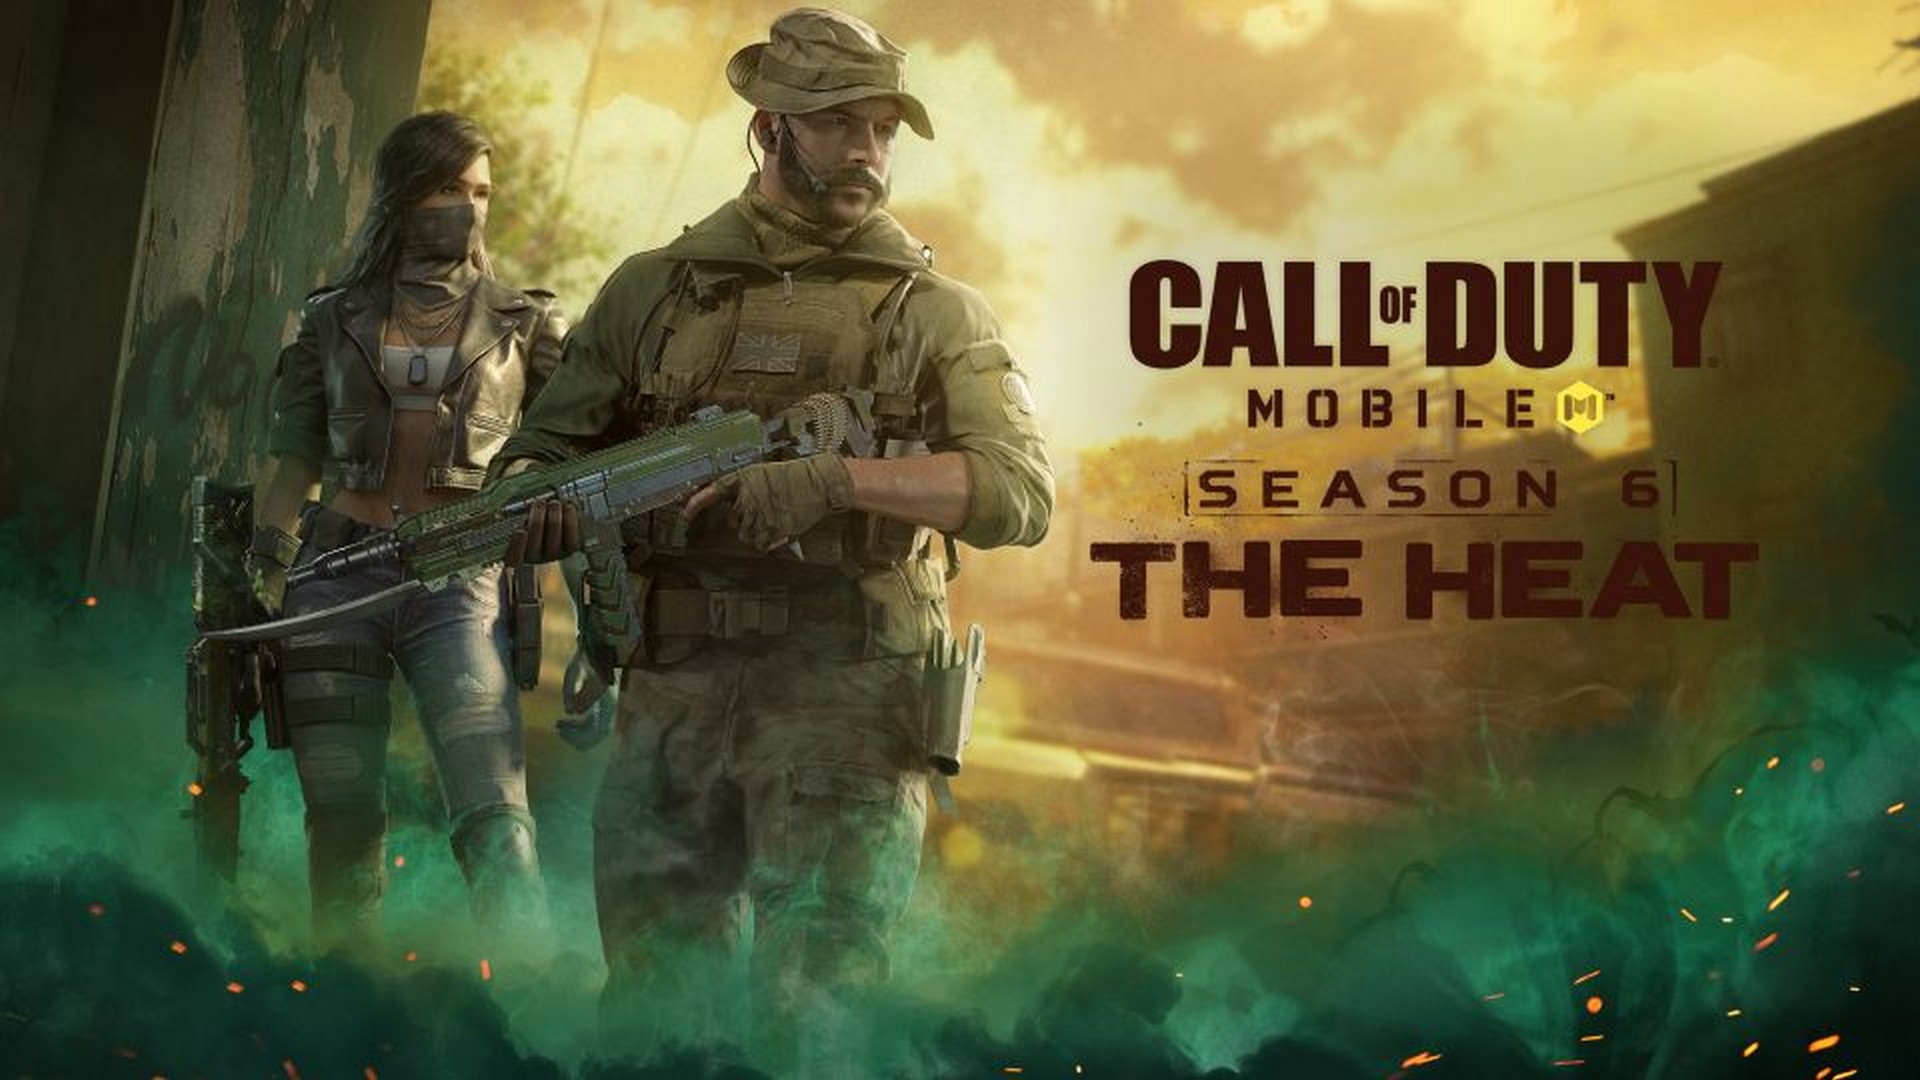 Call of Duty: Mobile Is Turning Up The Heat With The Launch Of Season 6: The Heat And The Return of Zombies